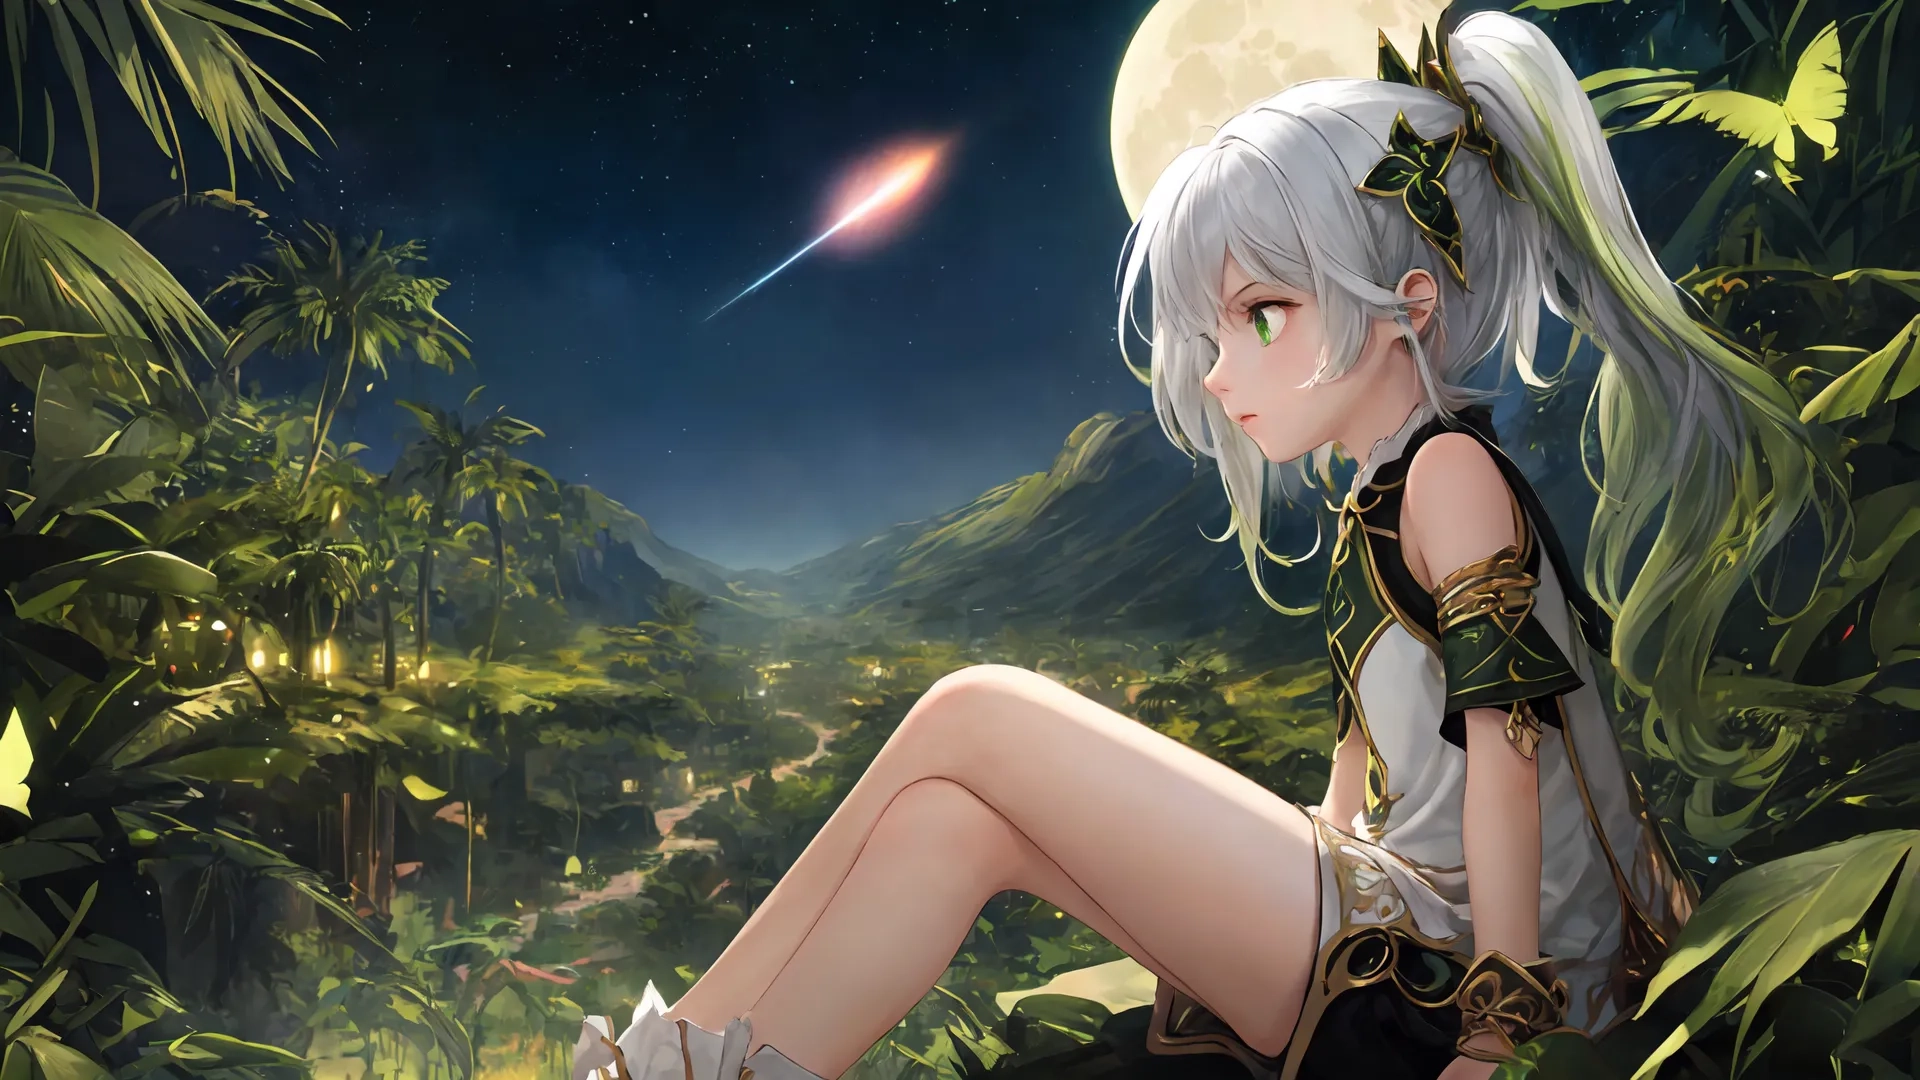 beautiful woman sitting in green tropical forest under moon lit sky with trailing rocket above her face and shoulders up to the moon - edge, looking toward the sky - like
